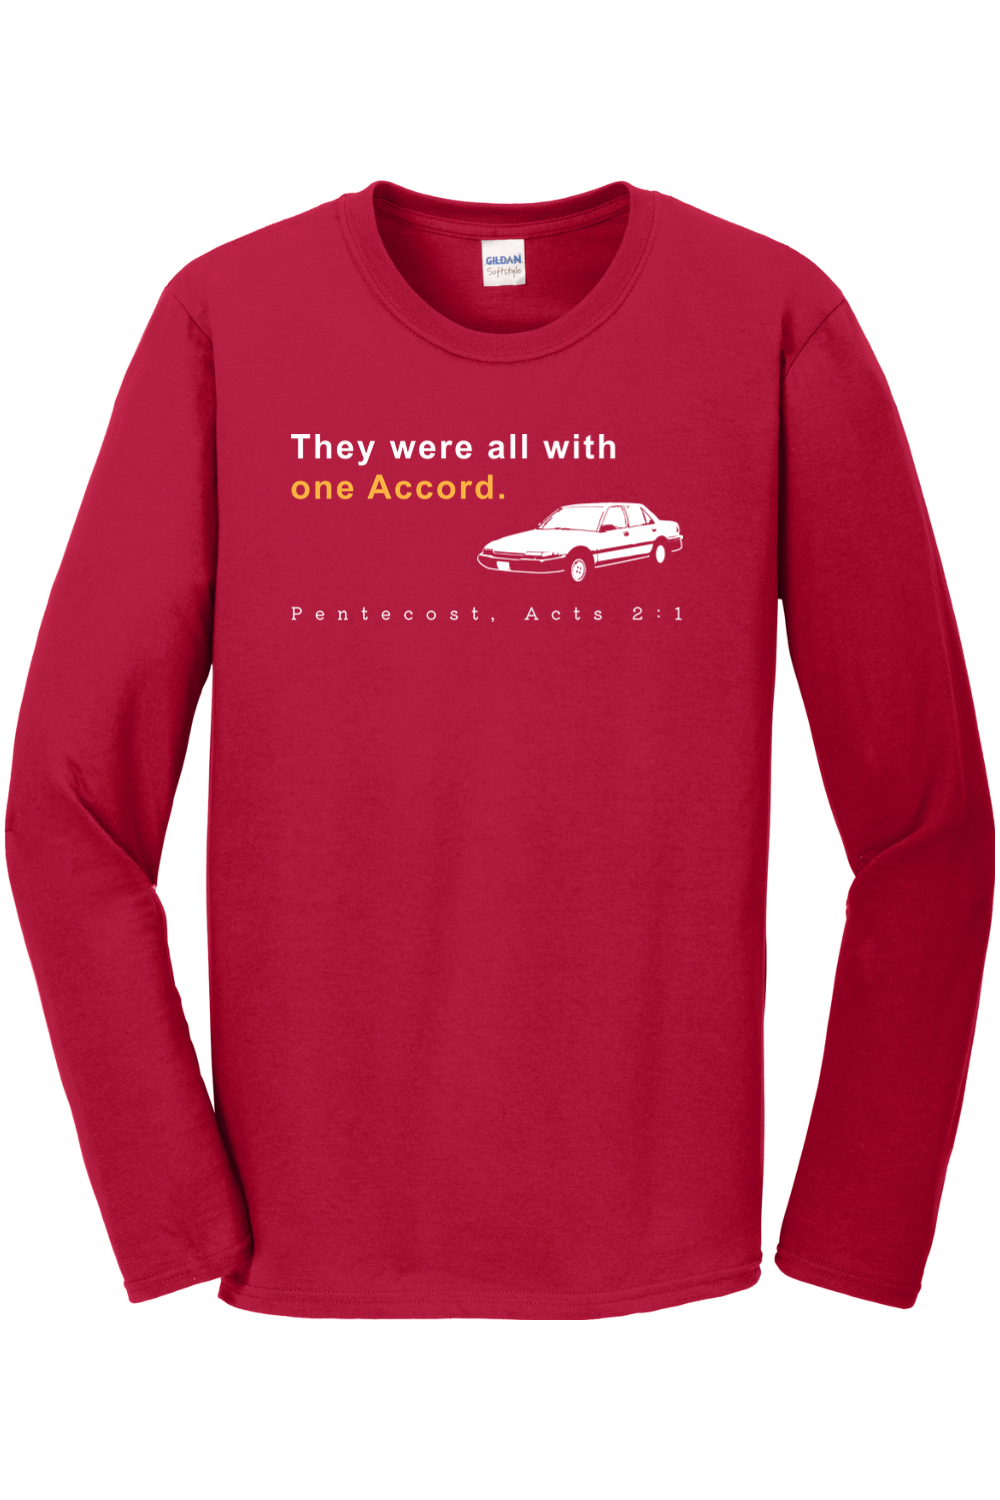 One Accord - Pentecost, Acts 2:1 Long Sleeve